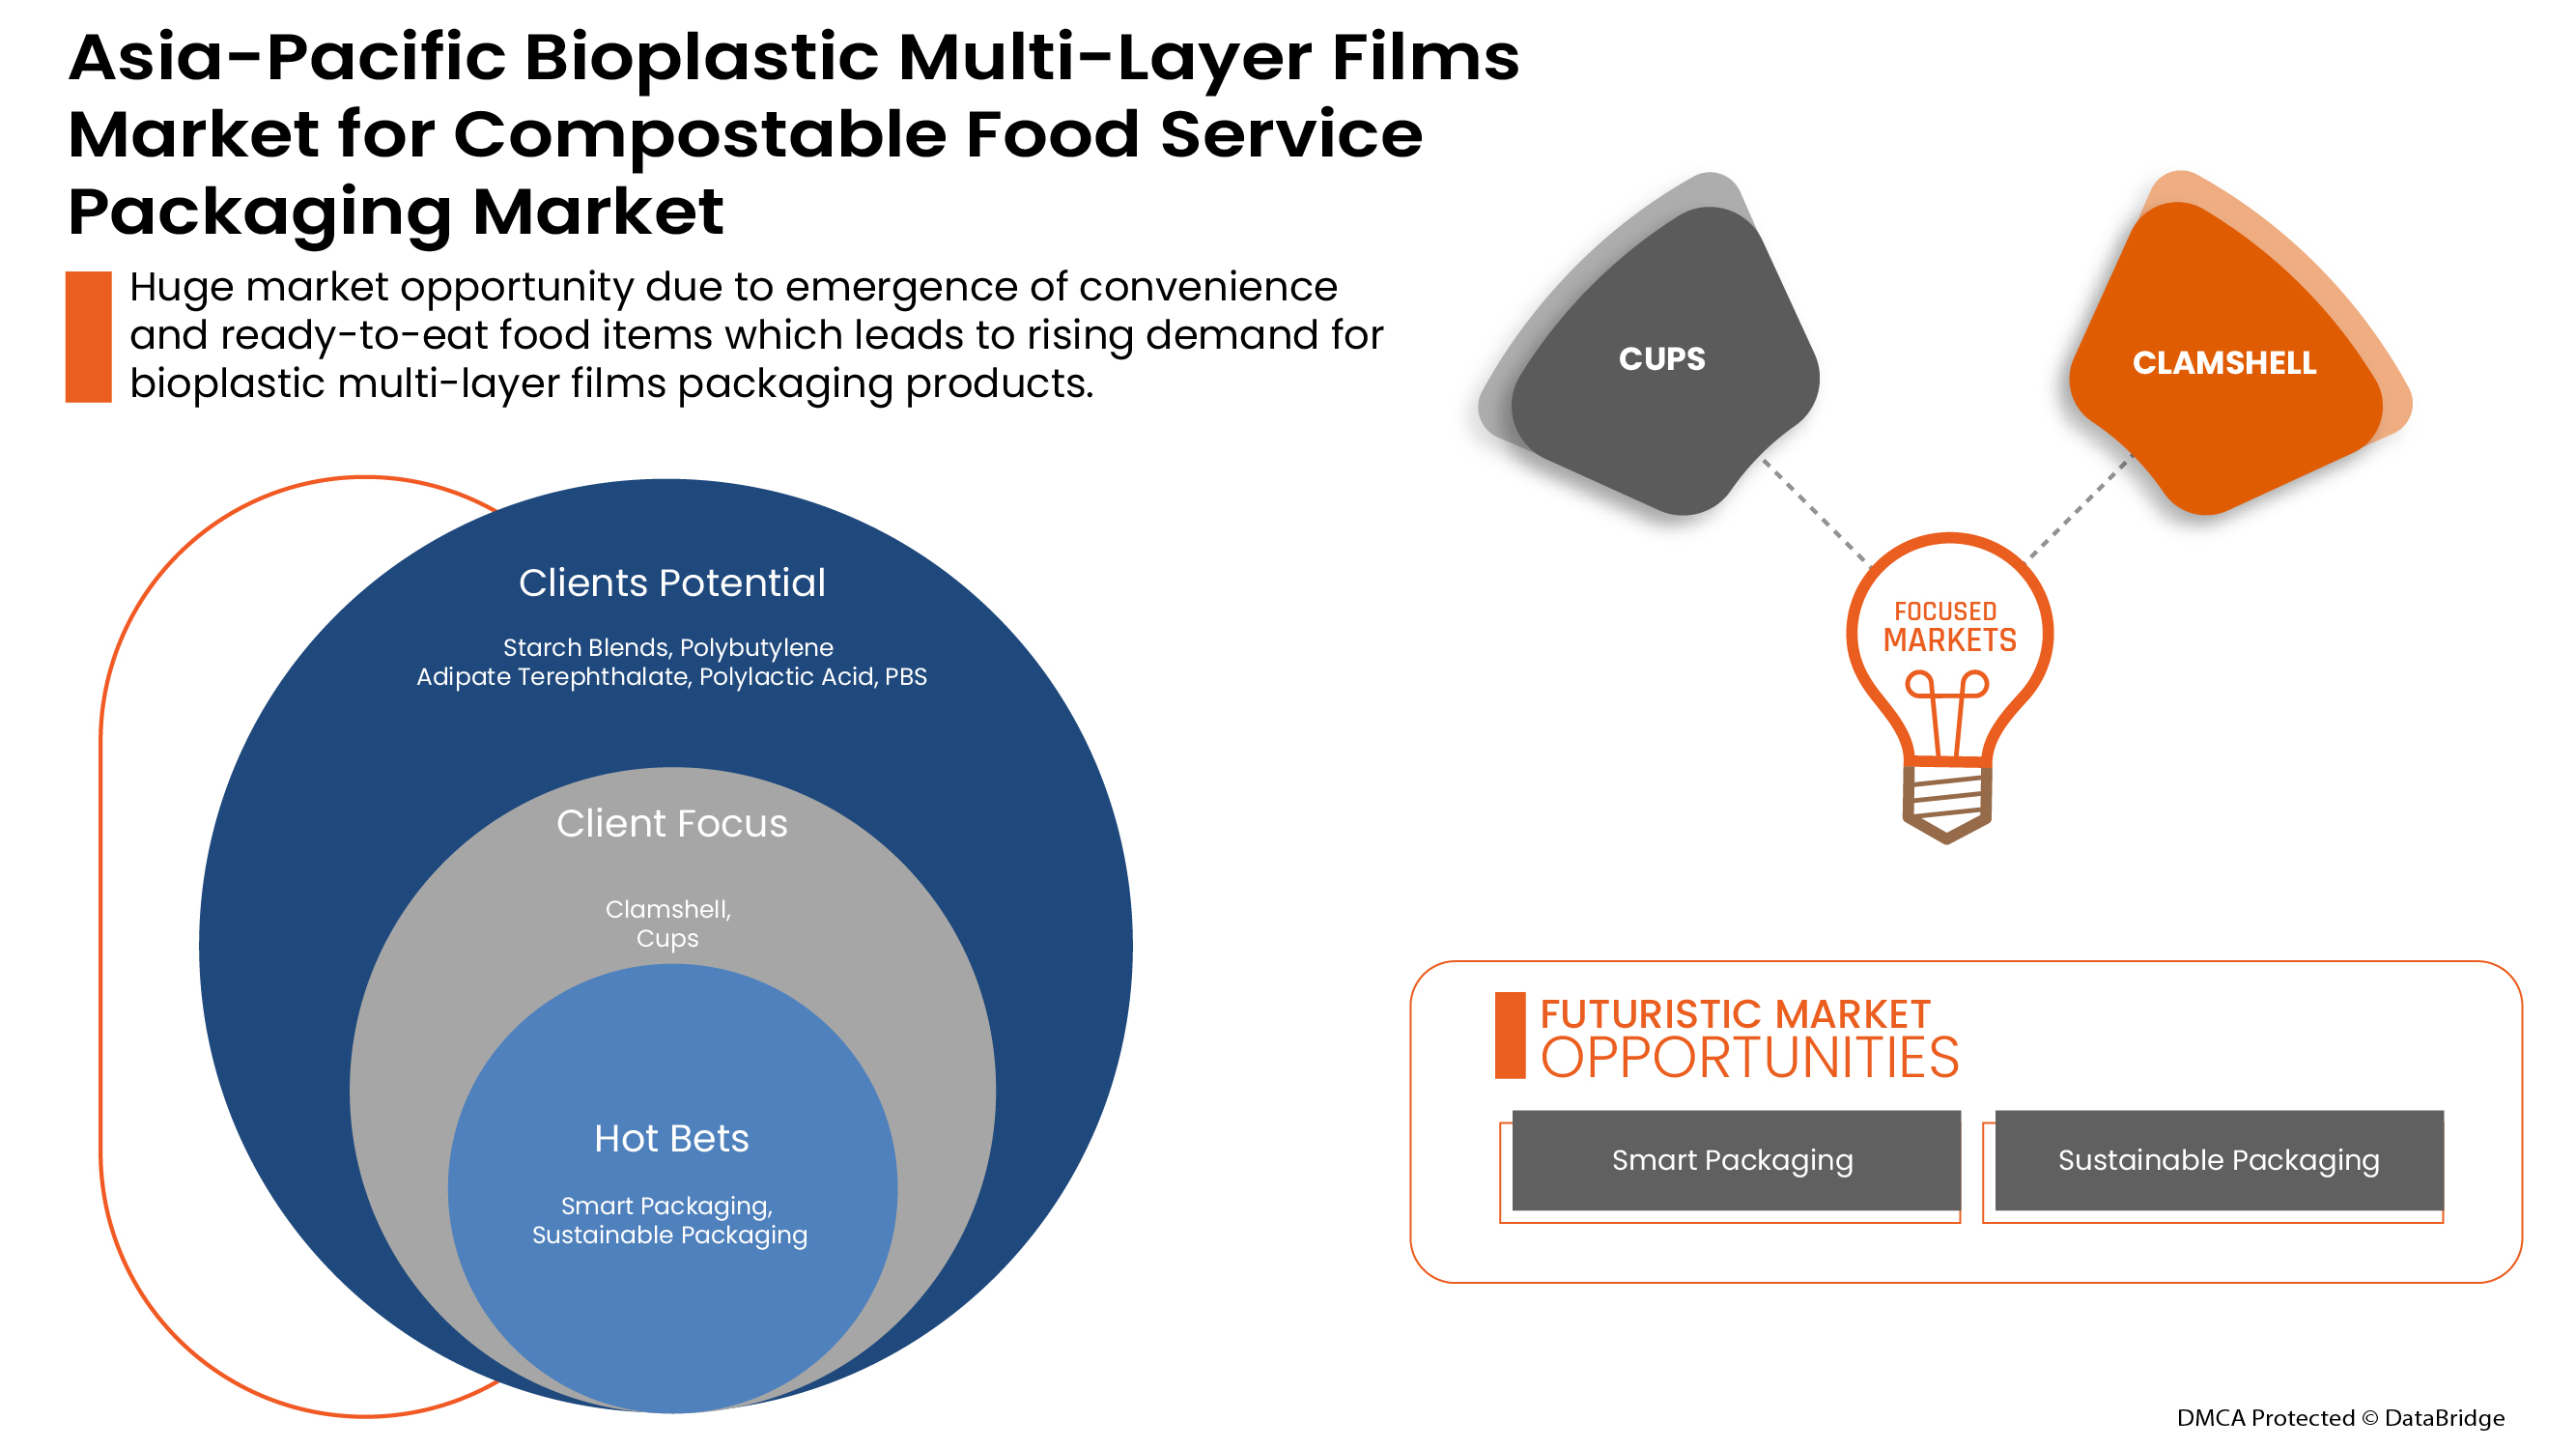 Asia-Pacific Bioplastic Multi-Layer Films Market for Compostable Food Service Packaging